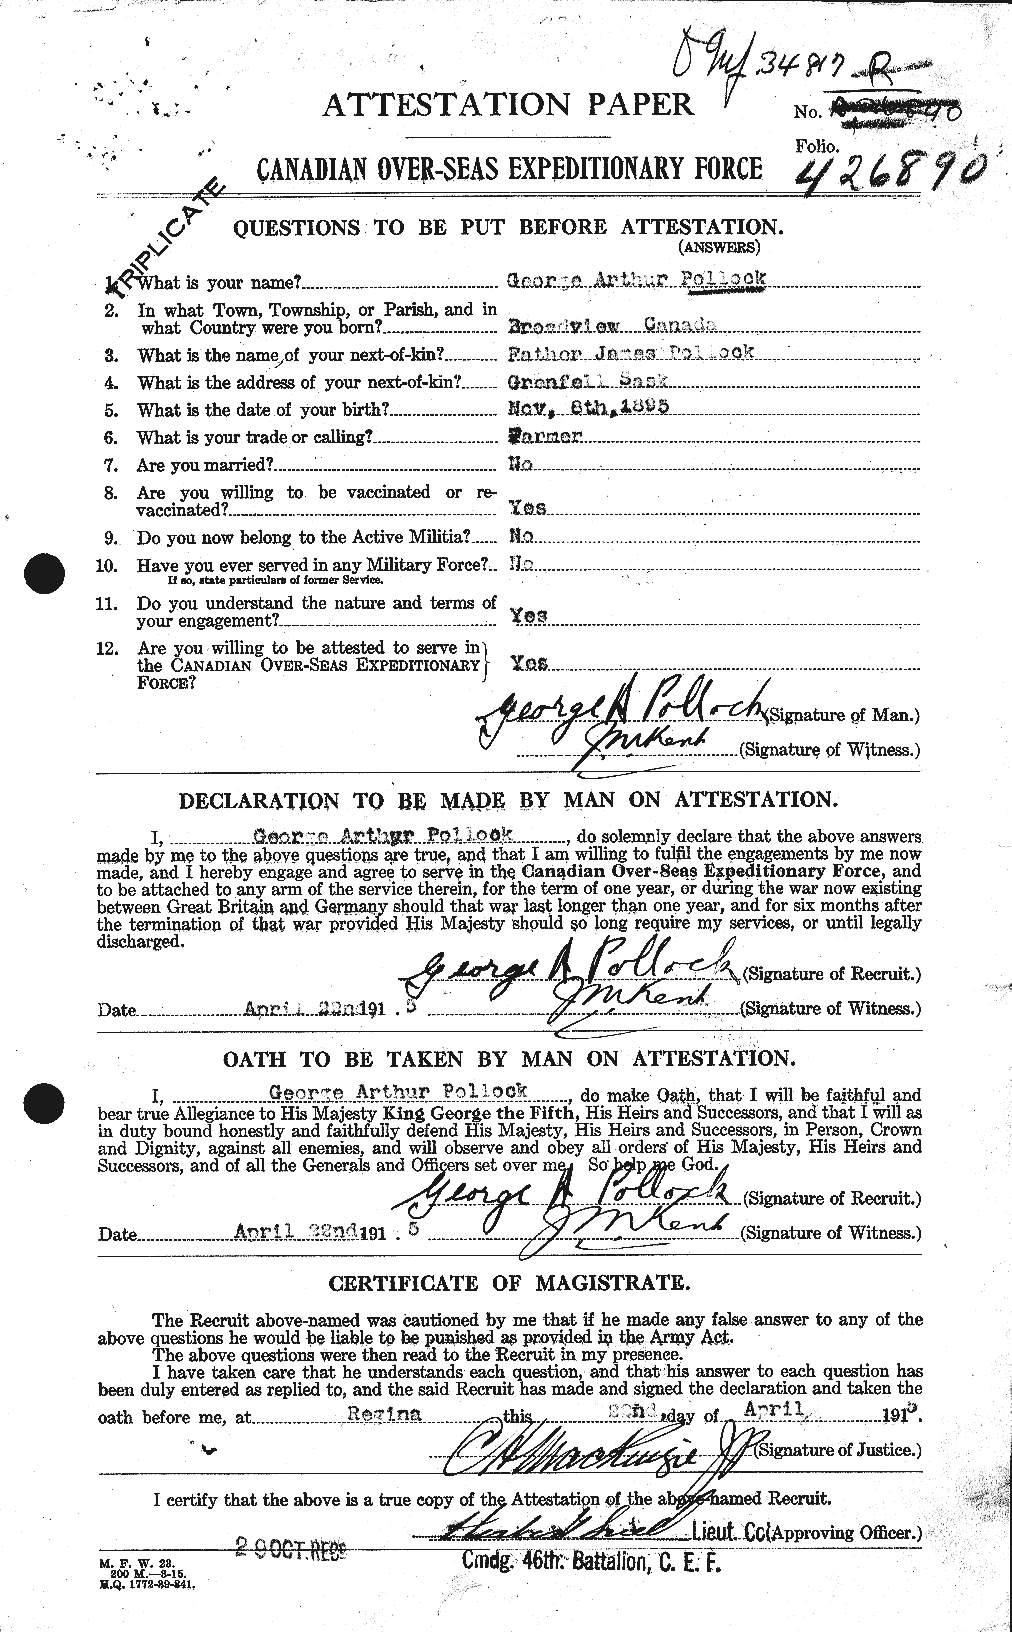 Personnel Records of the First World War - CEF 579910a